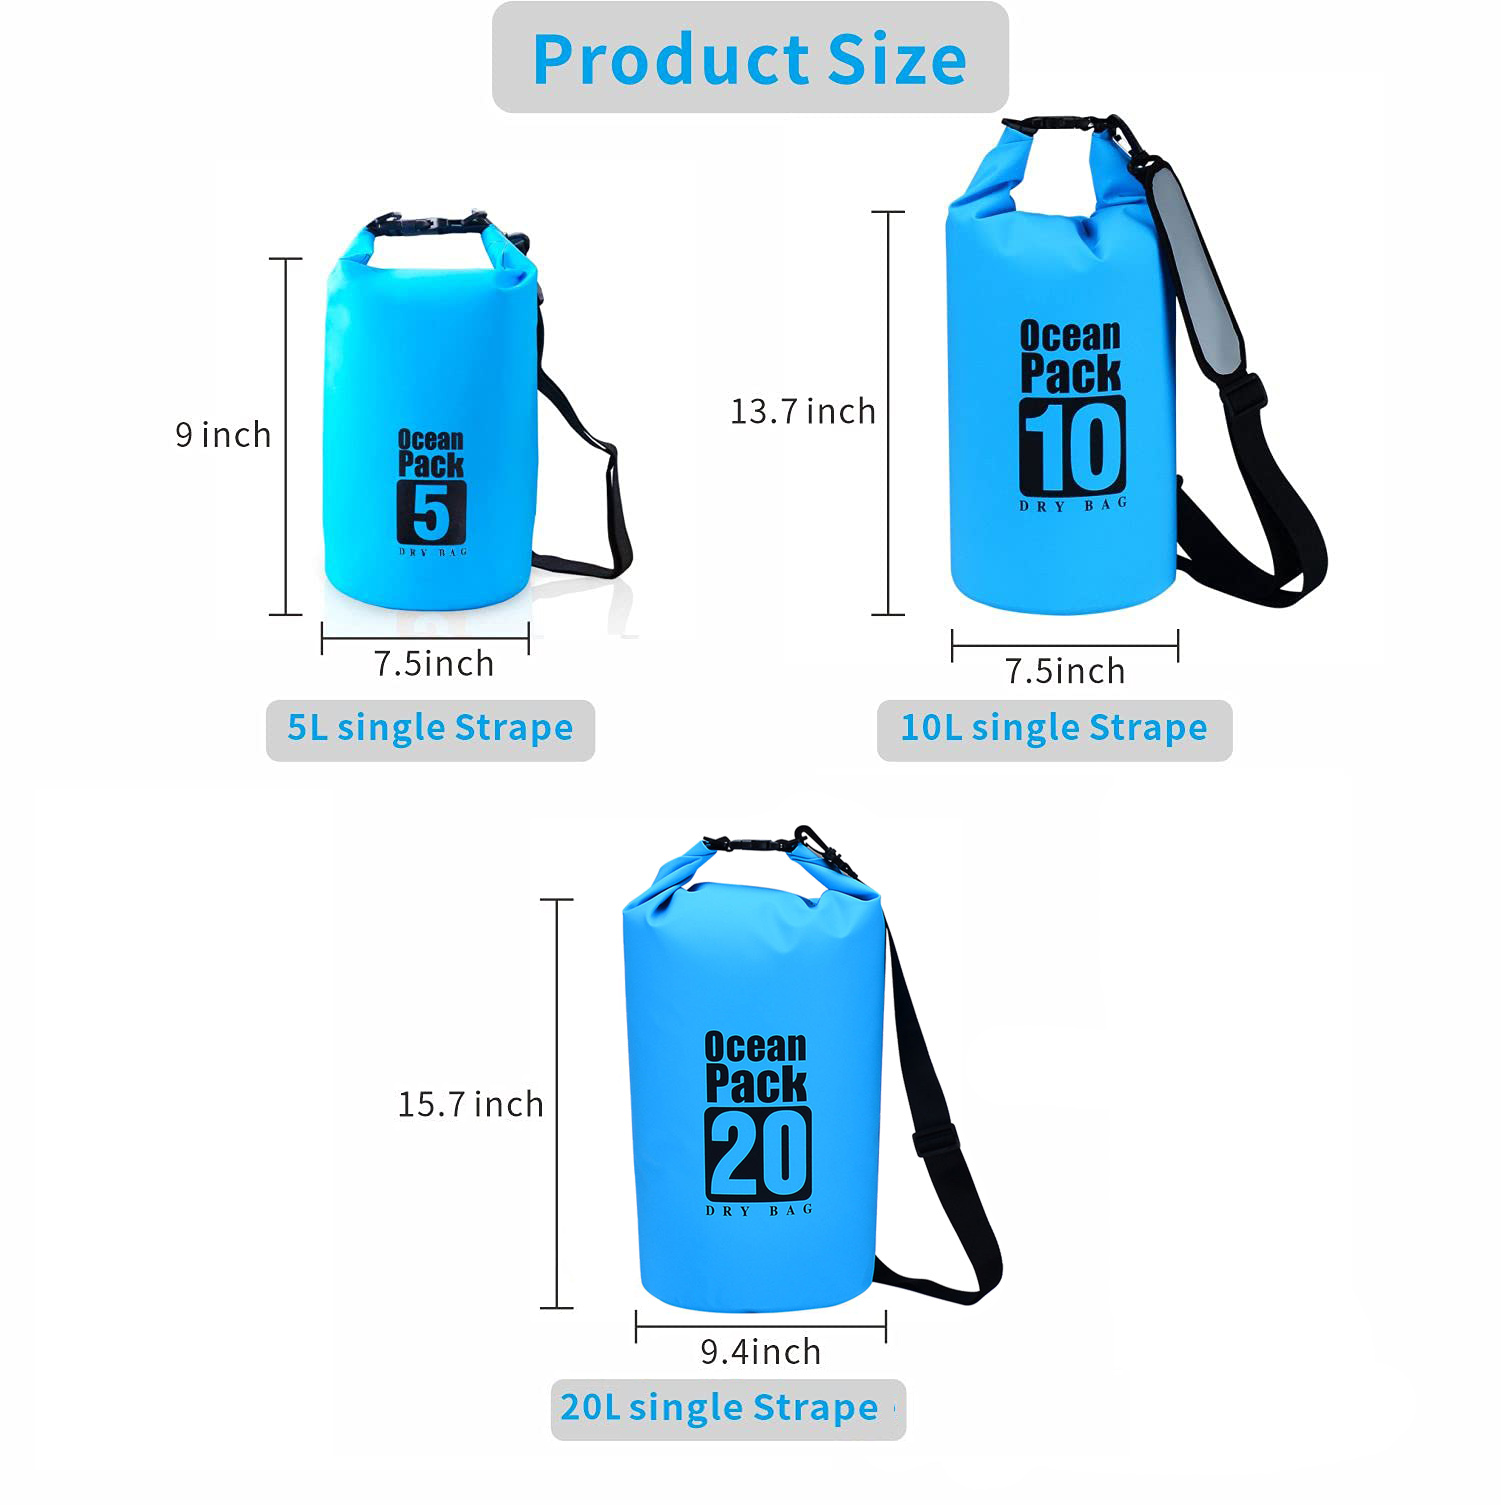 Waterproof Dry Bag,2L/5L/10L/15L/20L,Rainproof Backpack,Floating All Purpose Lightweight Beach Storage Bag,Roll Top Dry Compression Sack Keeps Gear Dry, for Kayak,Swim,Boating,Fishing,Camping - image 3 of 6